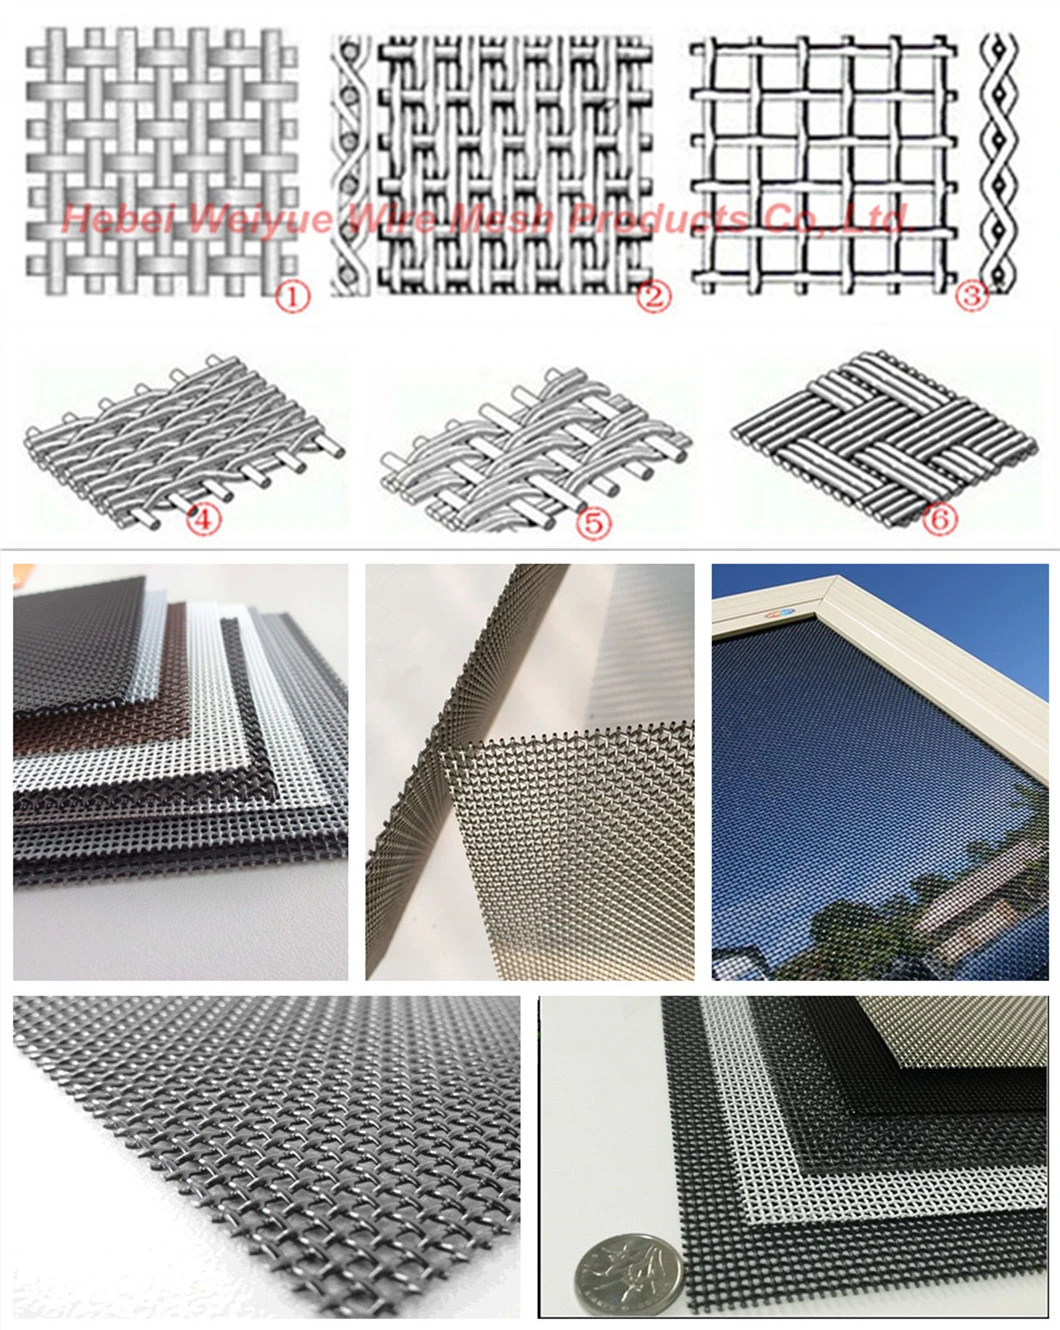 Stainless Steel Security Window Screen Anti-Theft Mosquito/ Insect Screen for Window and Door